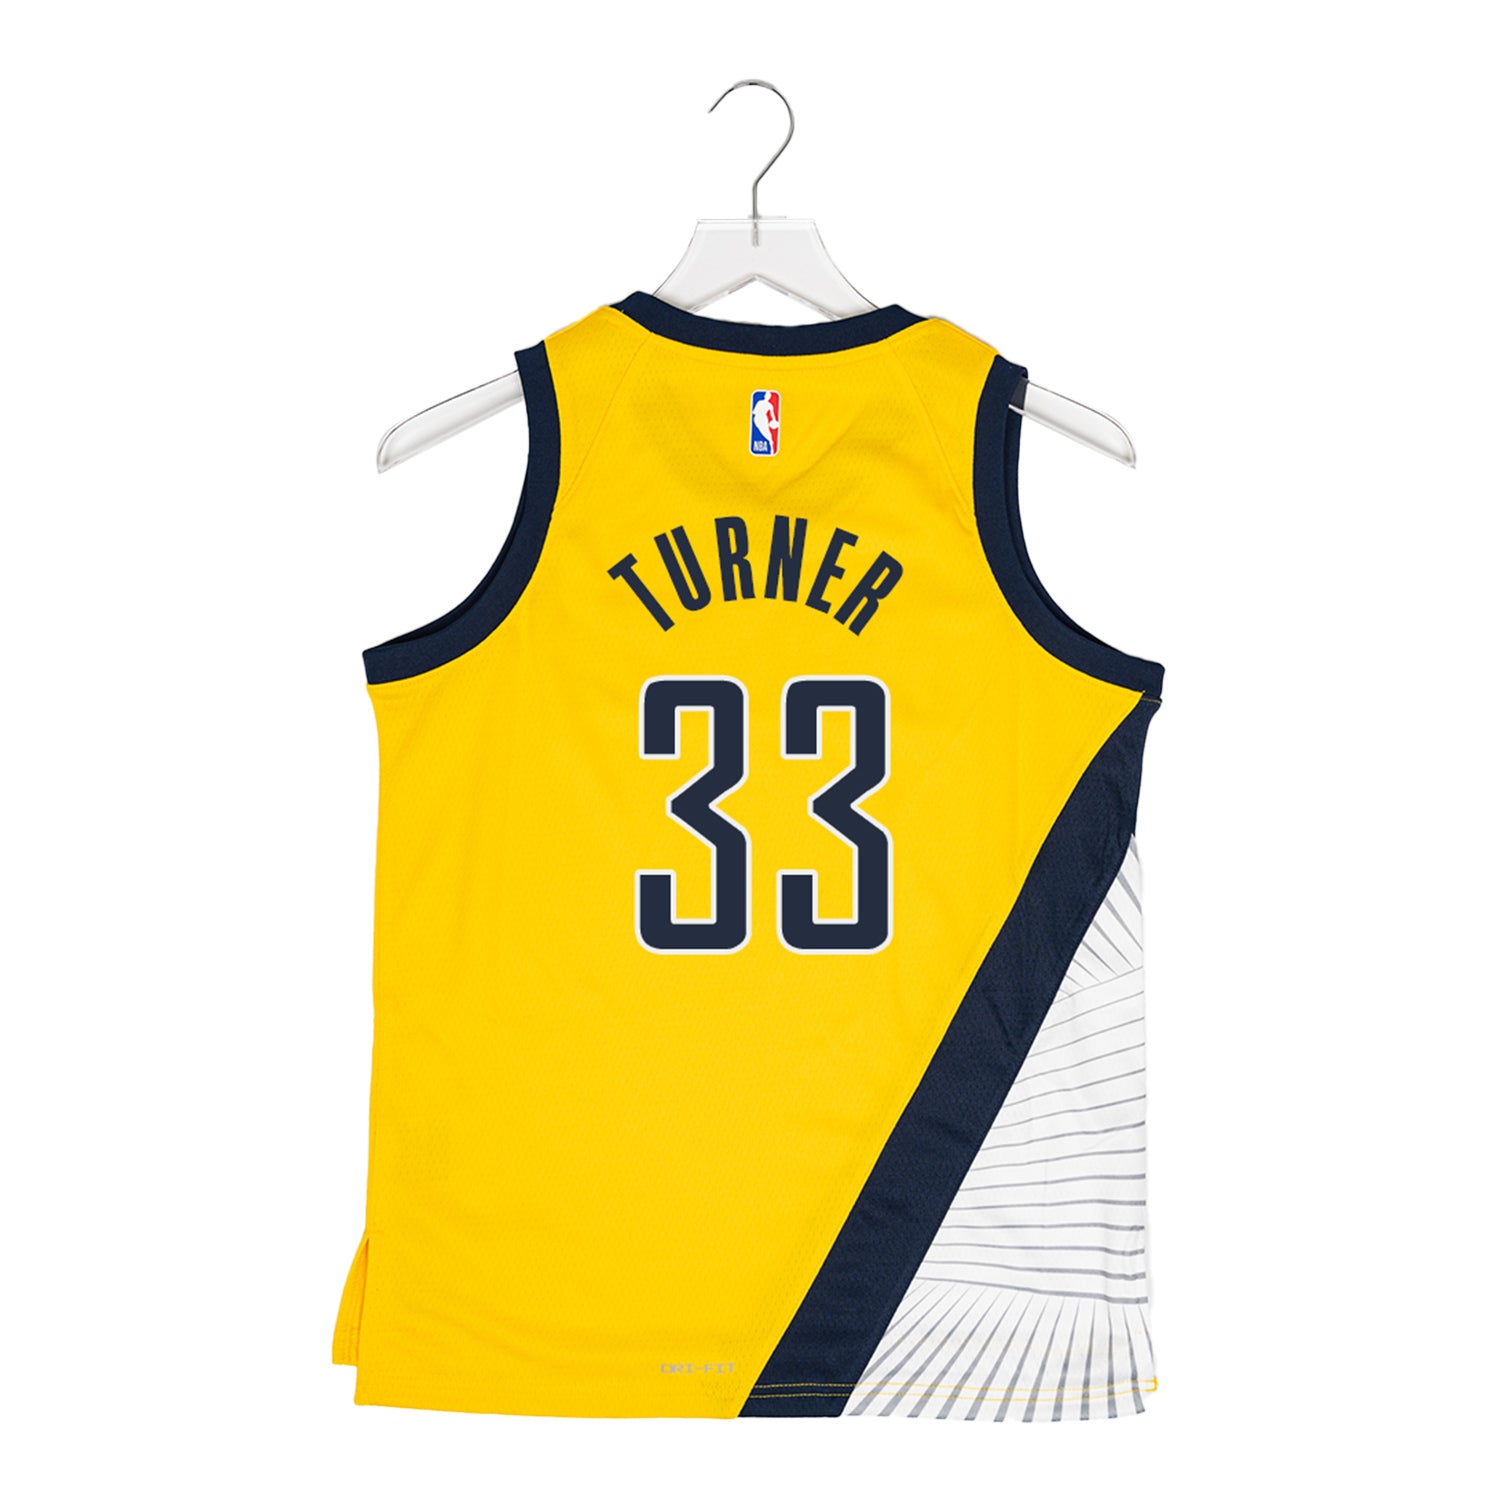 Youth Indiana Pacers #33 Turner Statement Edition Swingman Jersey by J